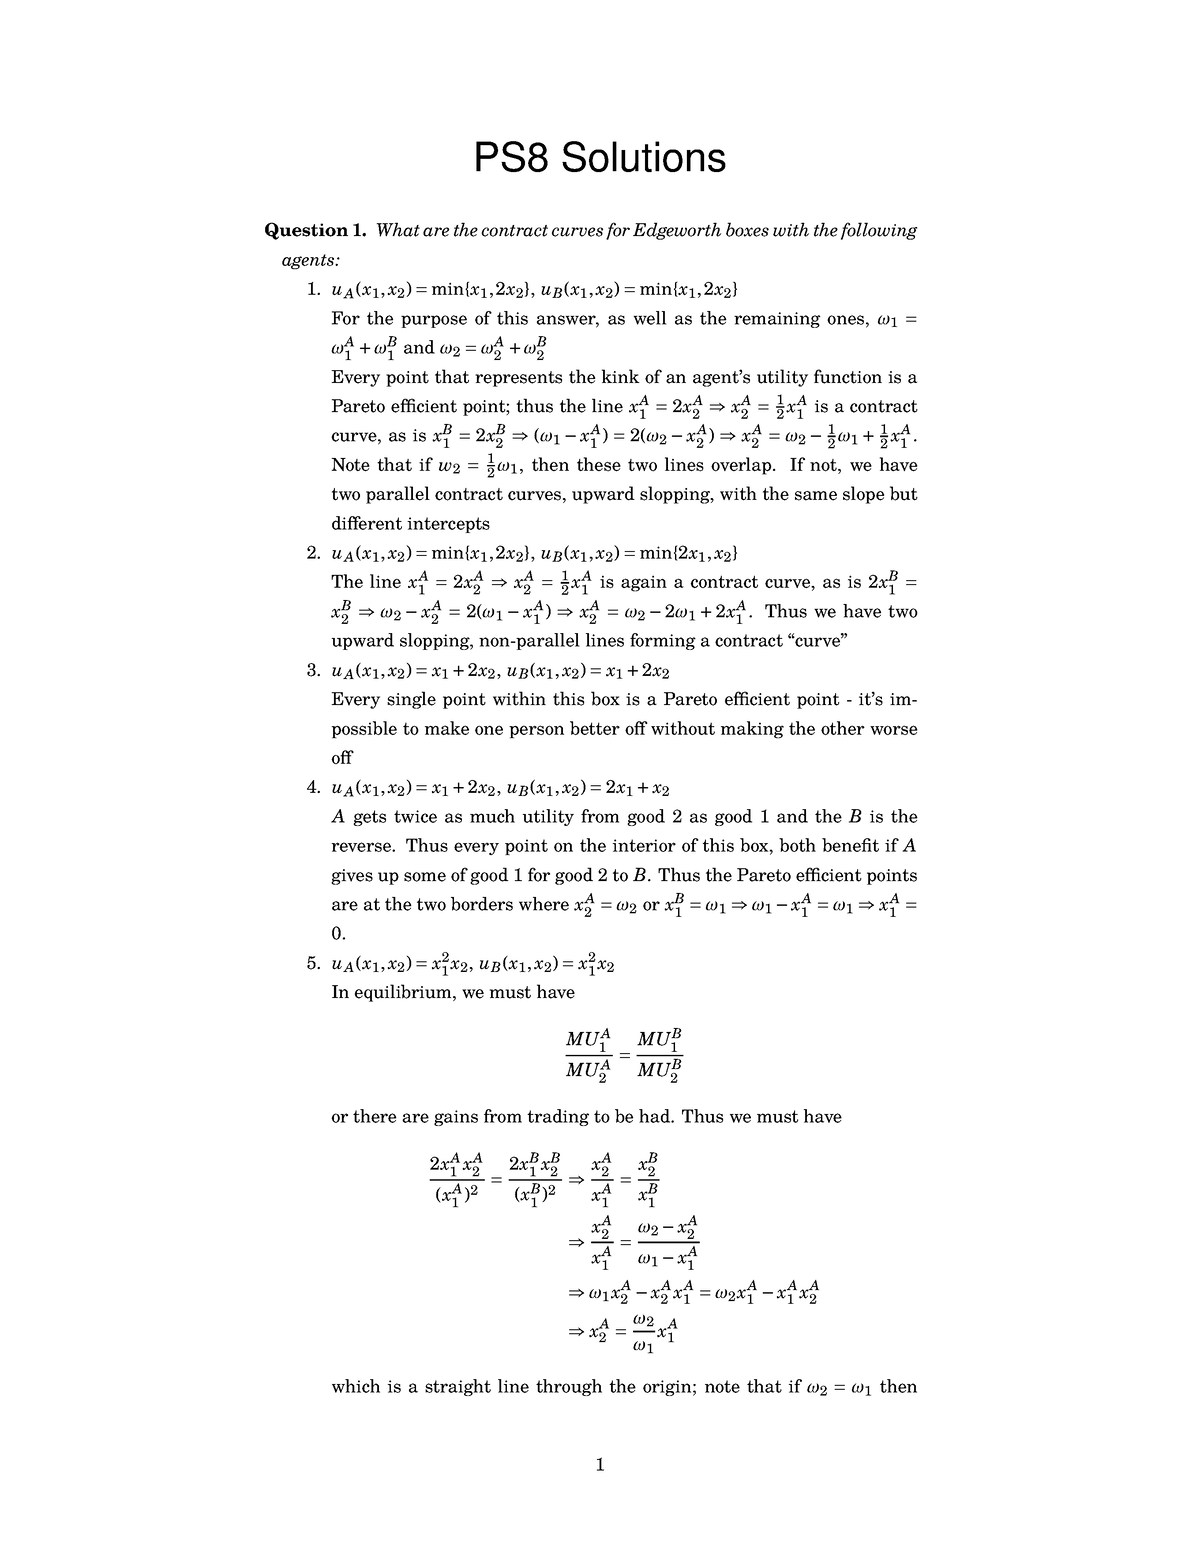 PS8 Solutions Prof. Kumar PS8 Solutions Question 1. What are the